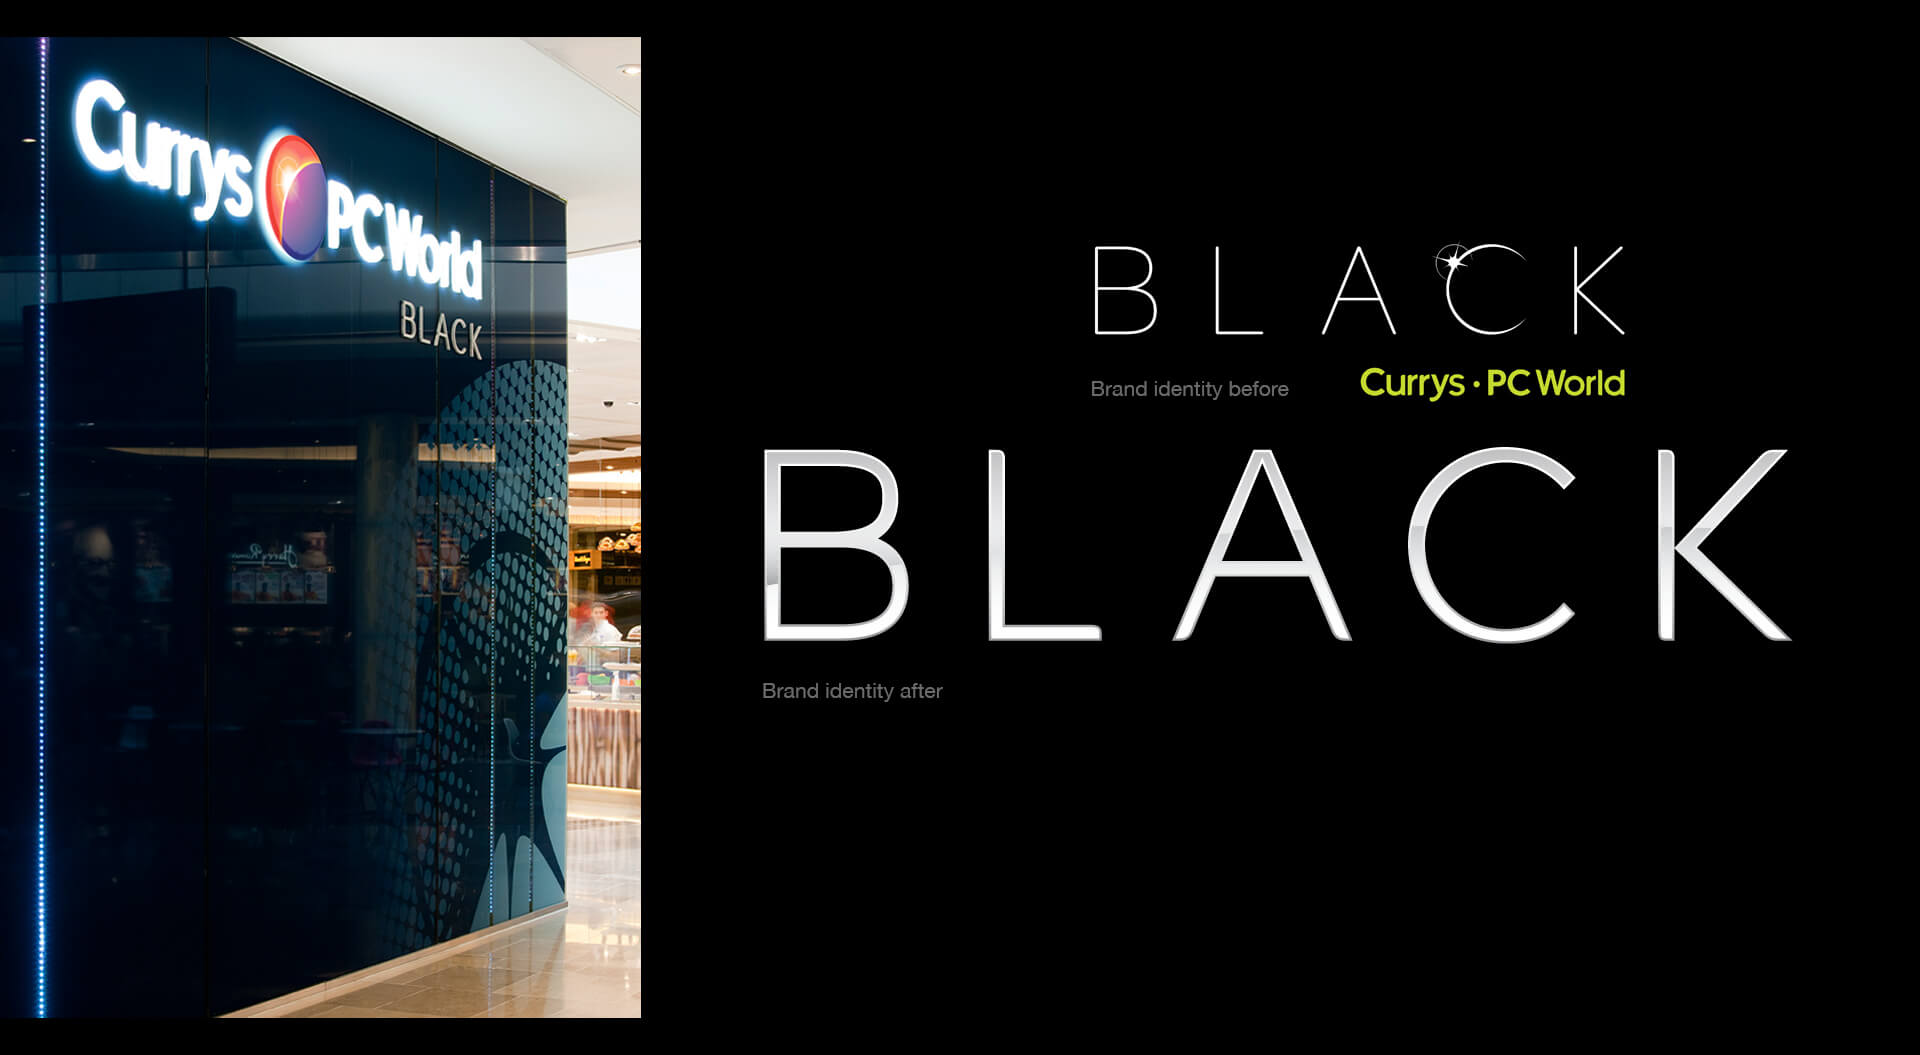 Black Currys PC World technology electronics store entrance branding and corporate brand identity before and rebrand identity after